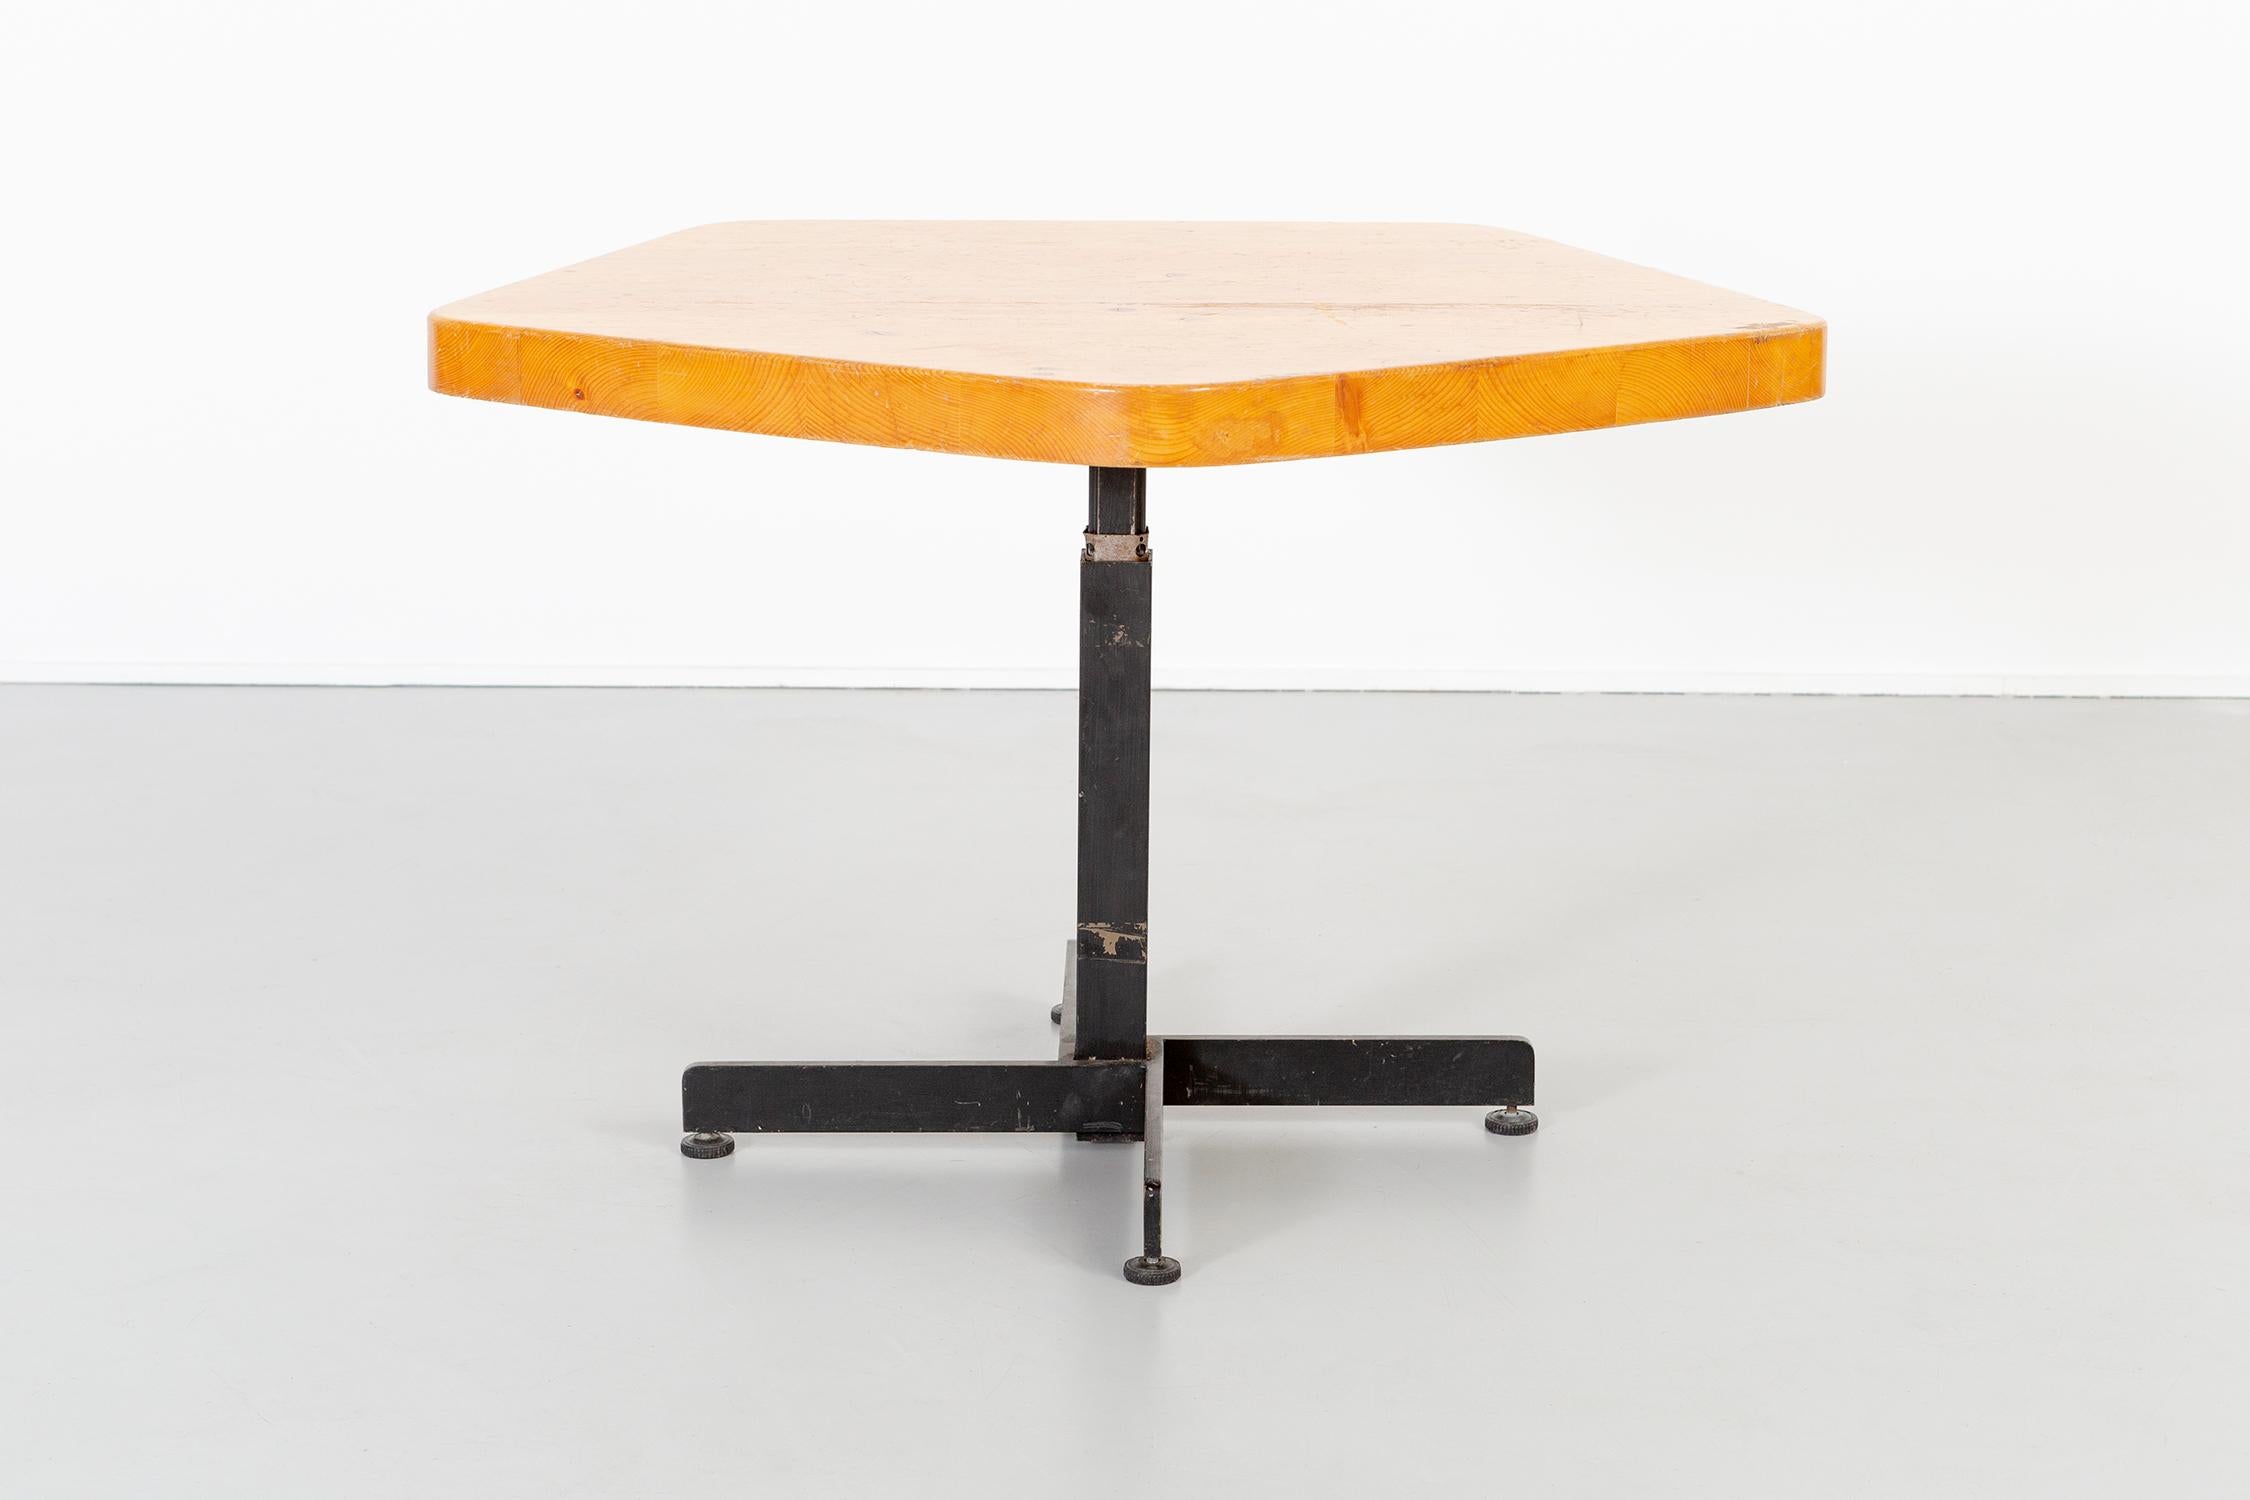 Pentagonal table

Designed by Charlotte Perriand for Les Arcs, 2000.

France, circa 1968.

Enameled steel and pine

Measures: 24 ?” H x 36 ¼” W x 35 ?” D.

Table height can be adjusted; this particular form was utilized in many Les Arcs